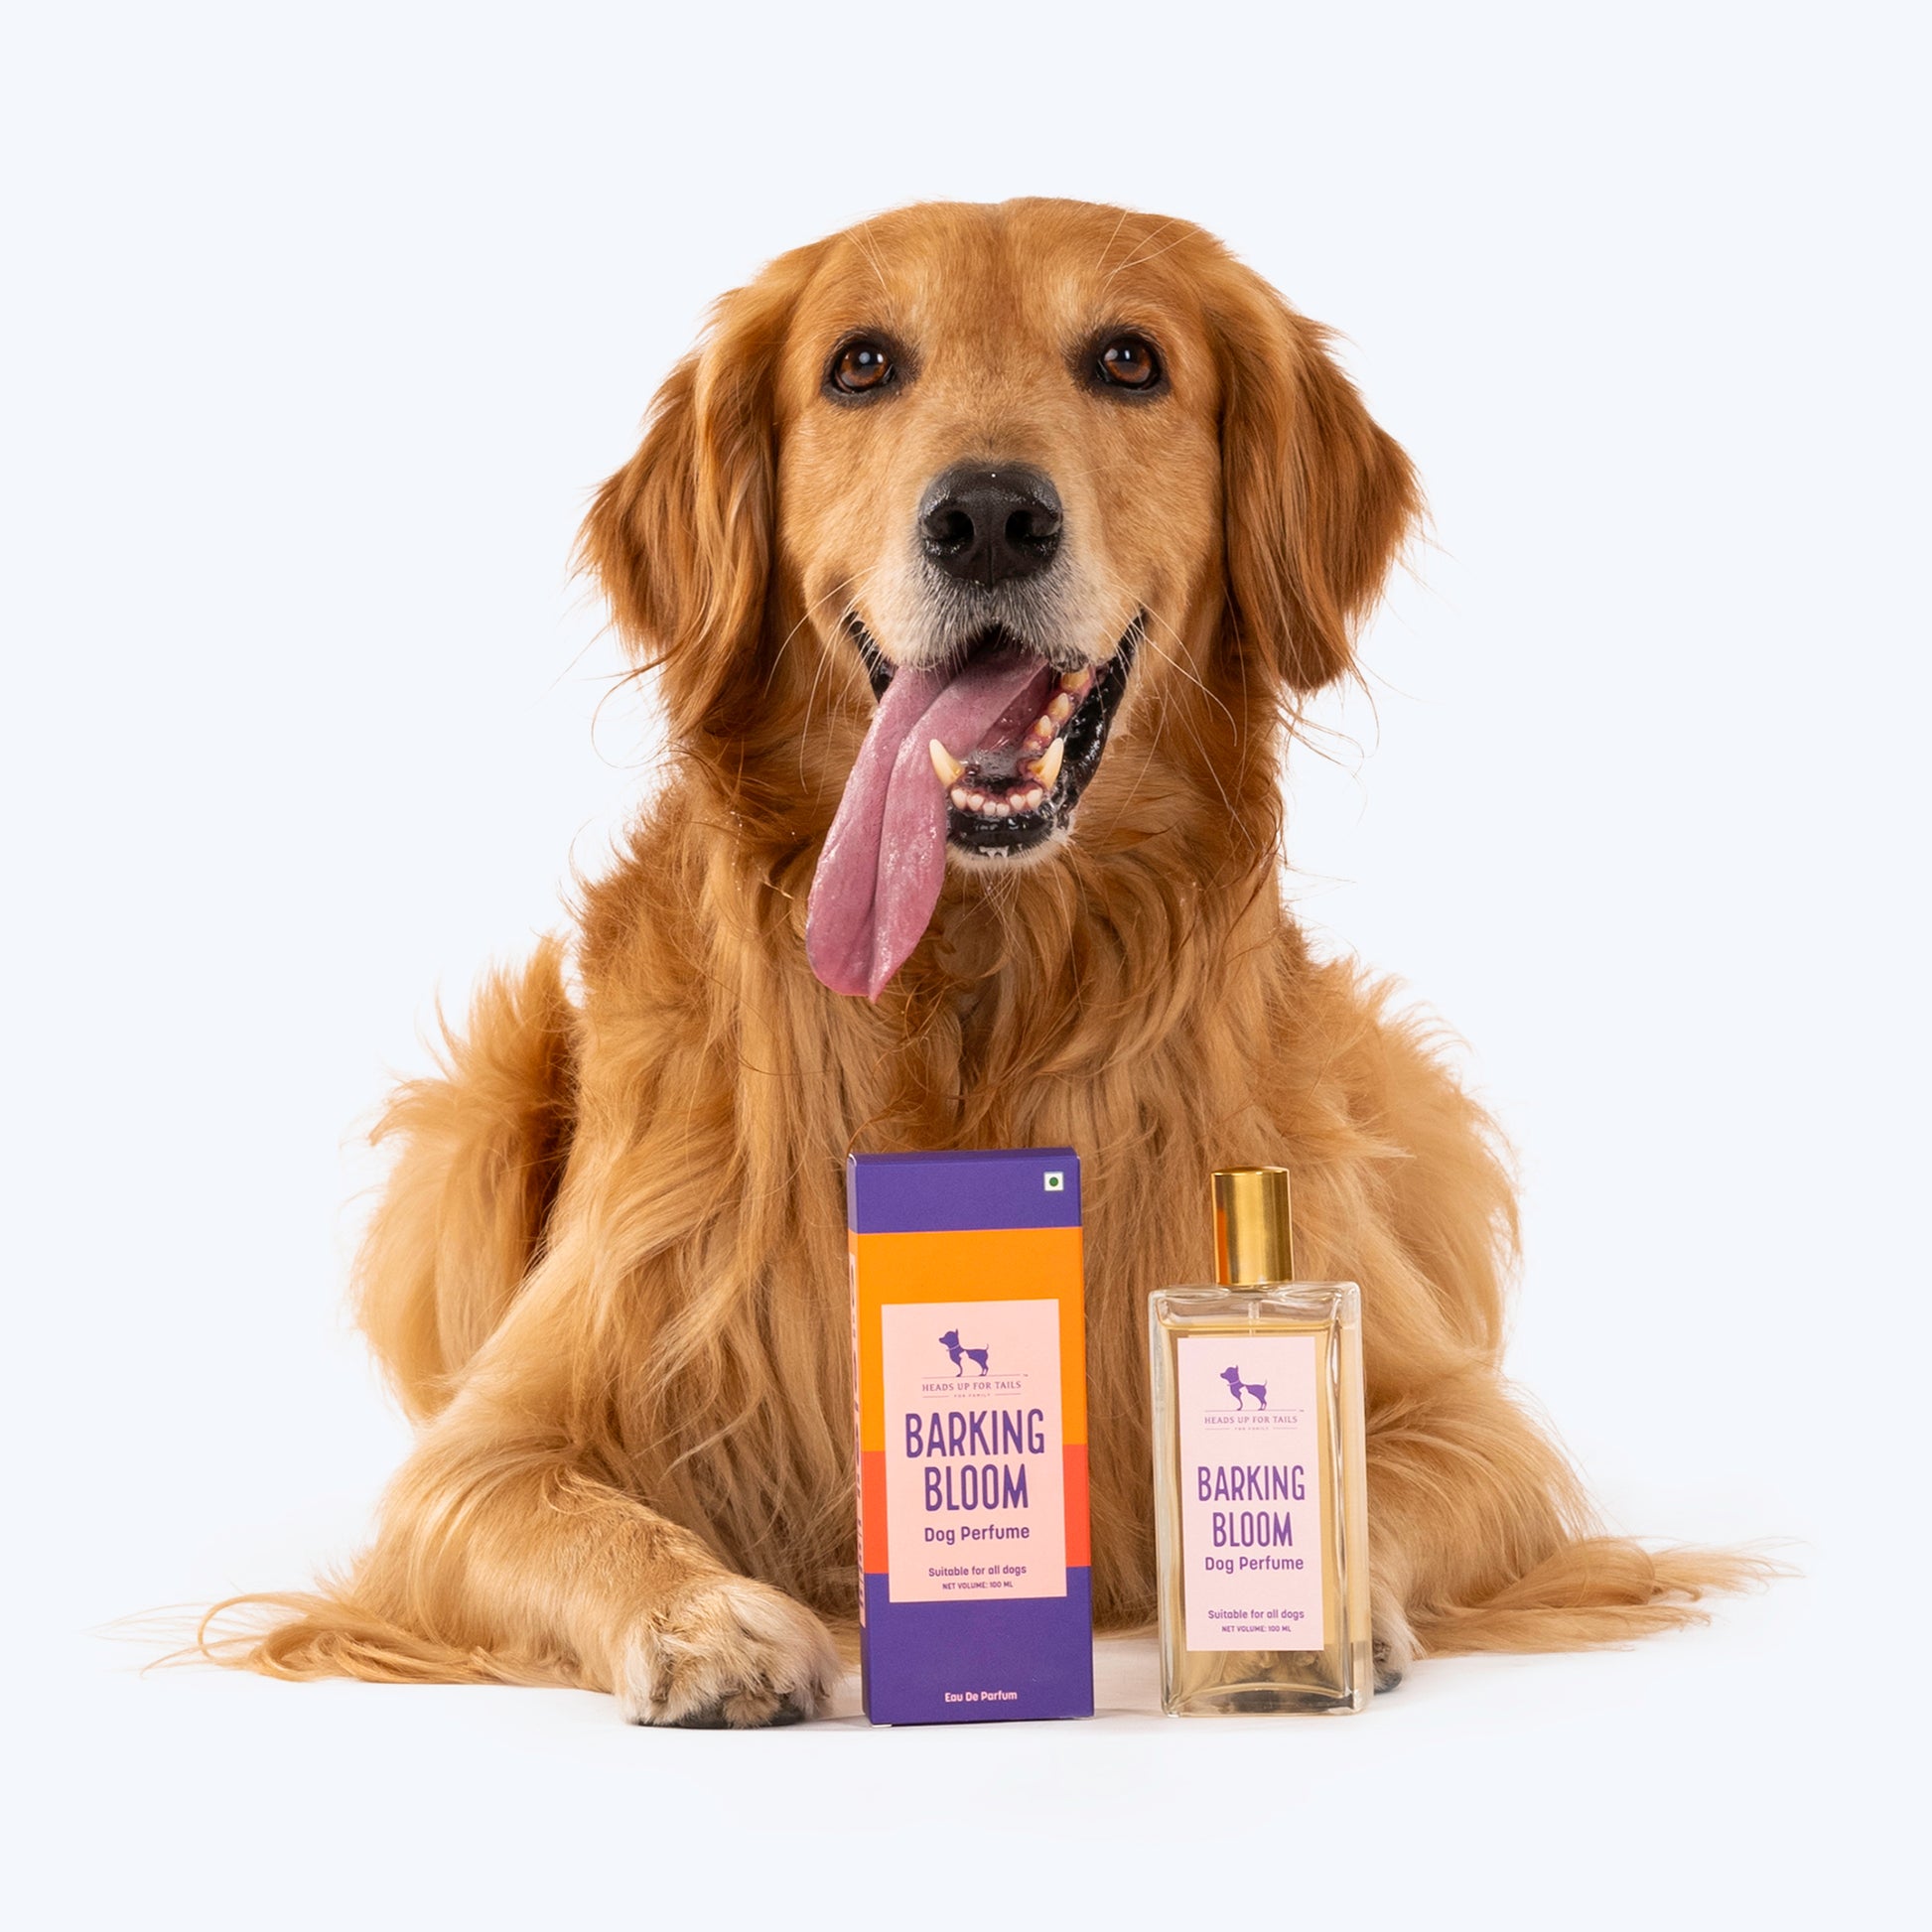 HUFT Barking Bloom Dog Perfume (Over 12 Weeks) - 100 ml - Heads Up For Tails